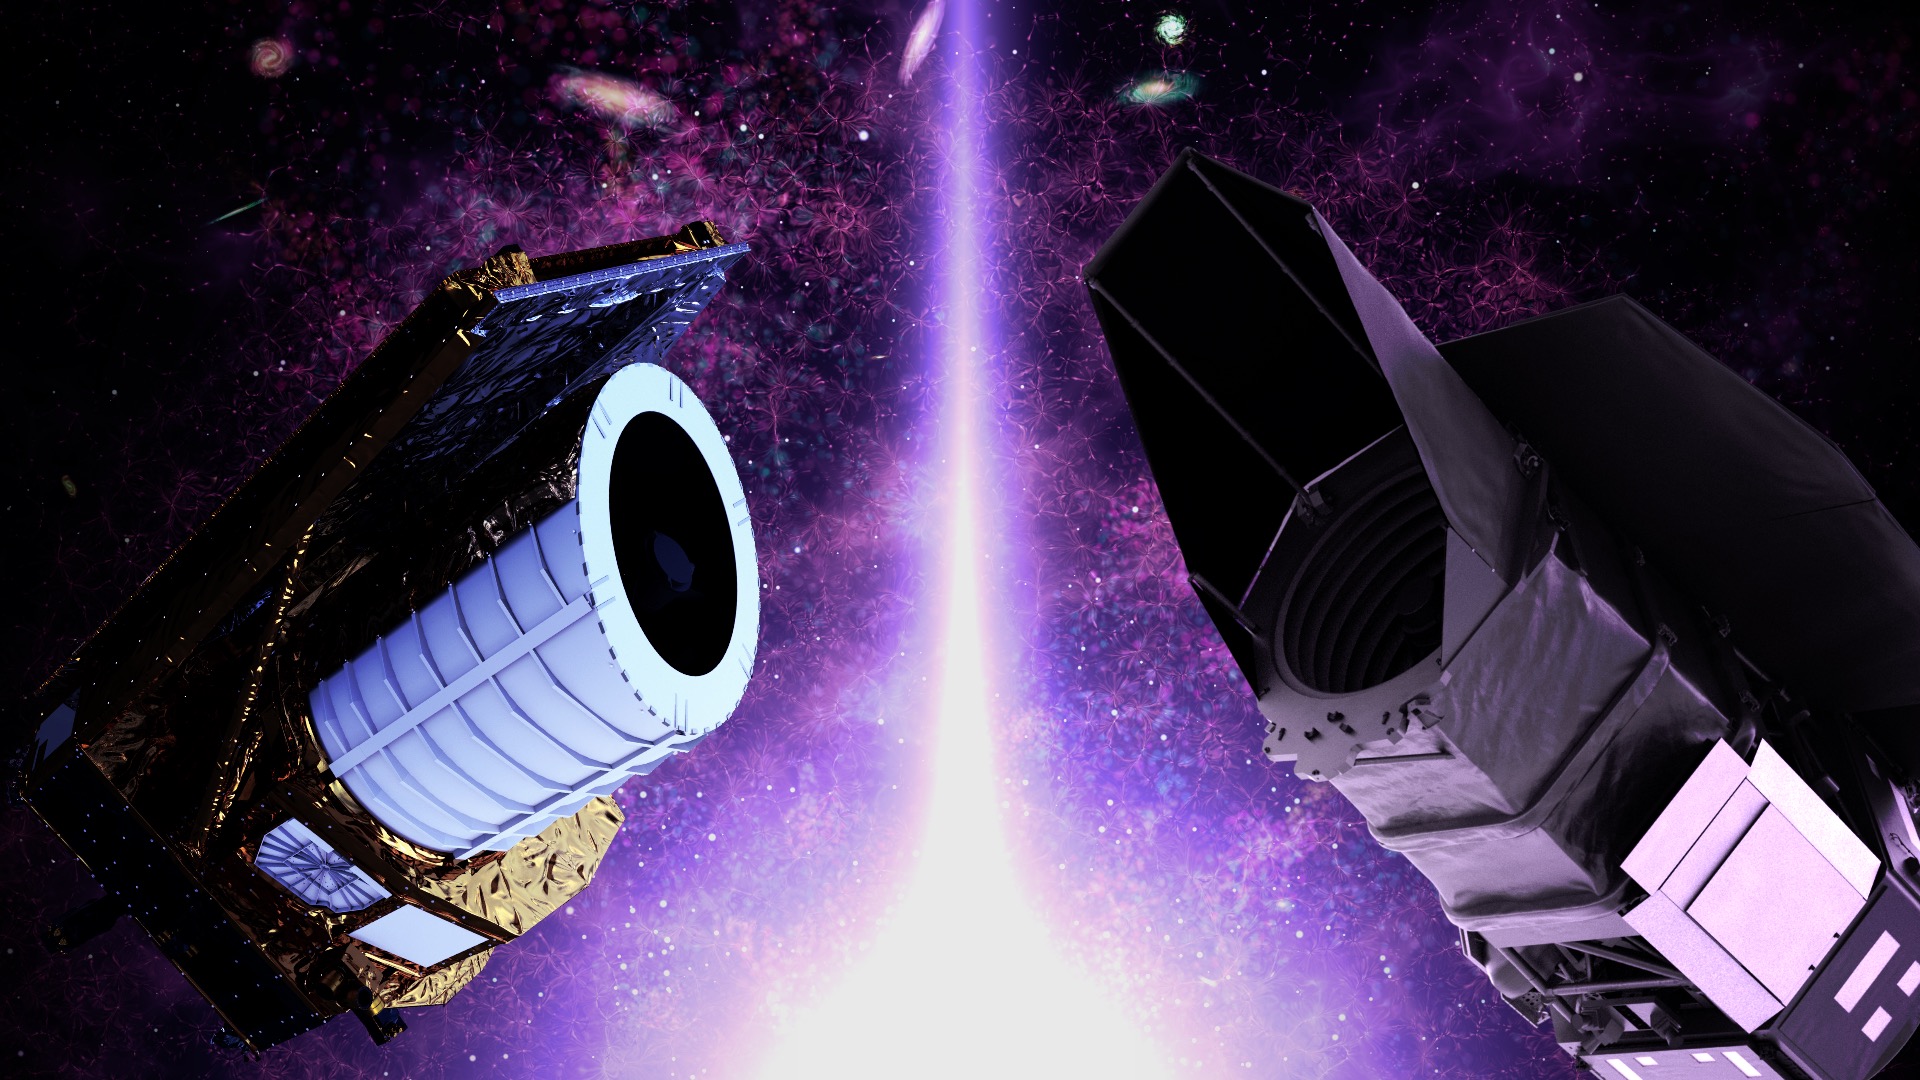 Euclid (left) is a medium-class ESA mission.  The Nancy Grace Roman Space Telescope (right) is an upcoming NASA flagship mission.  Both will study the history of the universe and bring new insight to the mystery of dark energy.Credit: NASA's Goddard Space Flight Center; ESA/ATG medialab